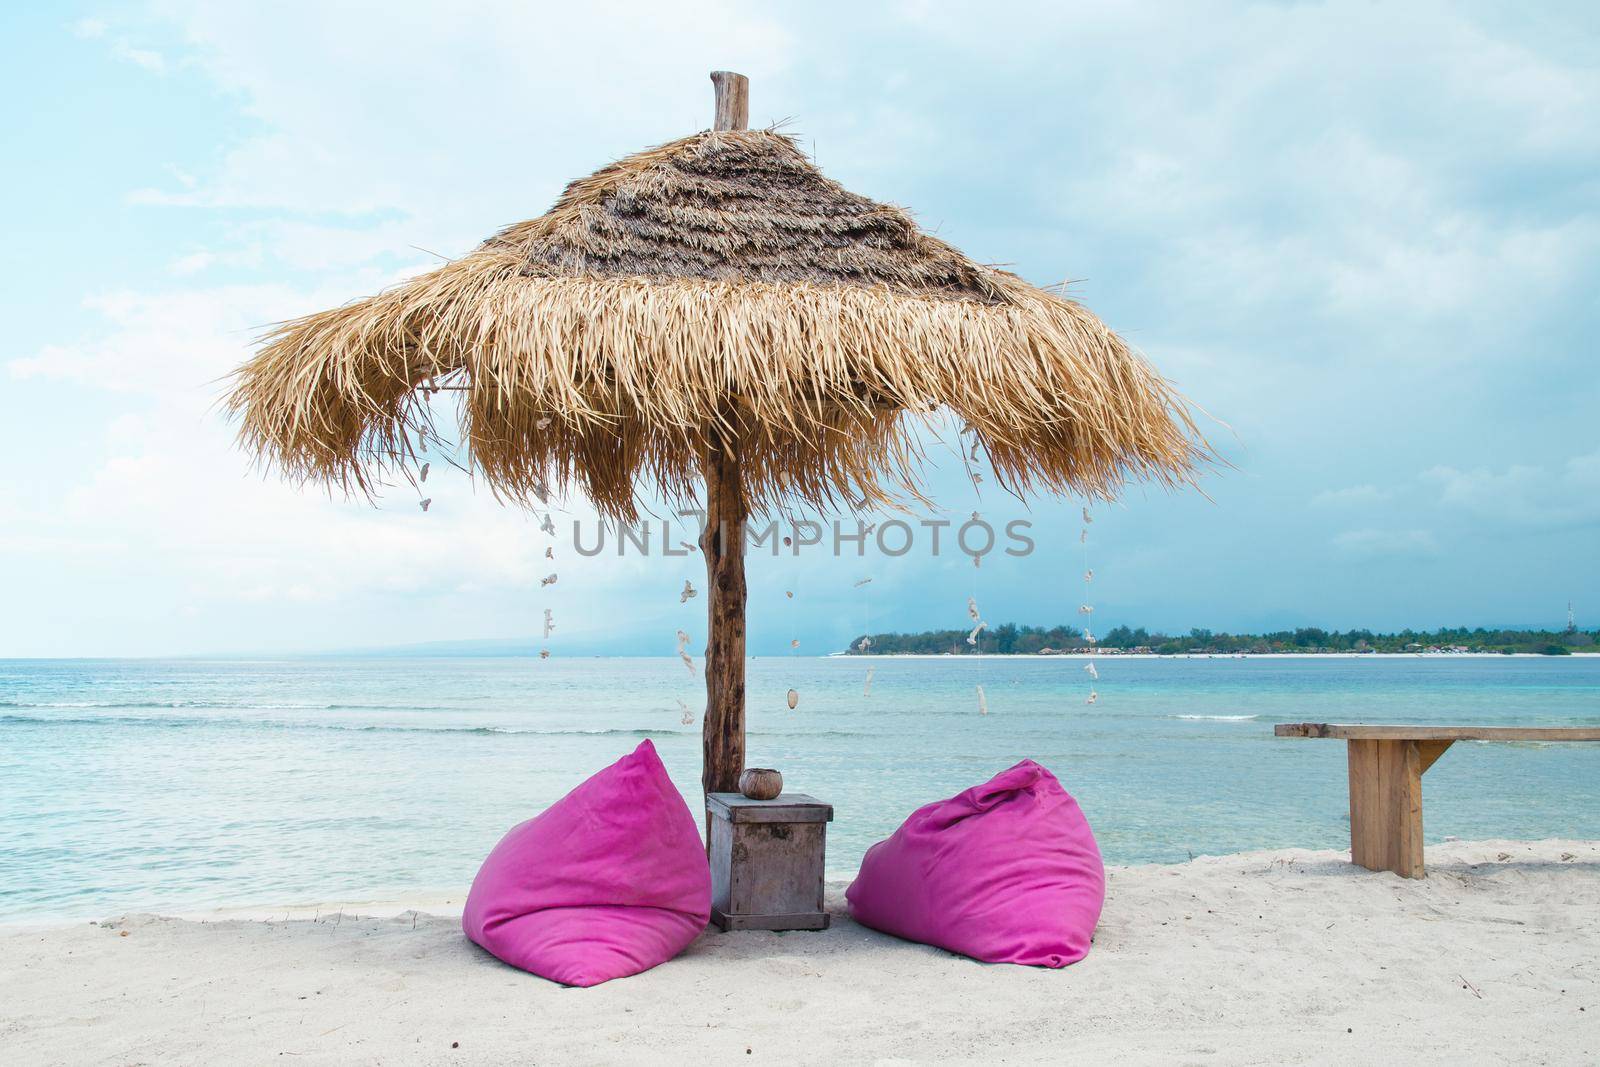 Beach umbrella and deck chairs on the bright tropical island of Bali. Stock image.